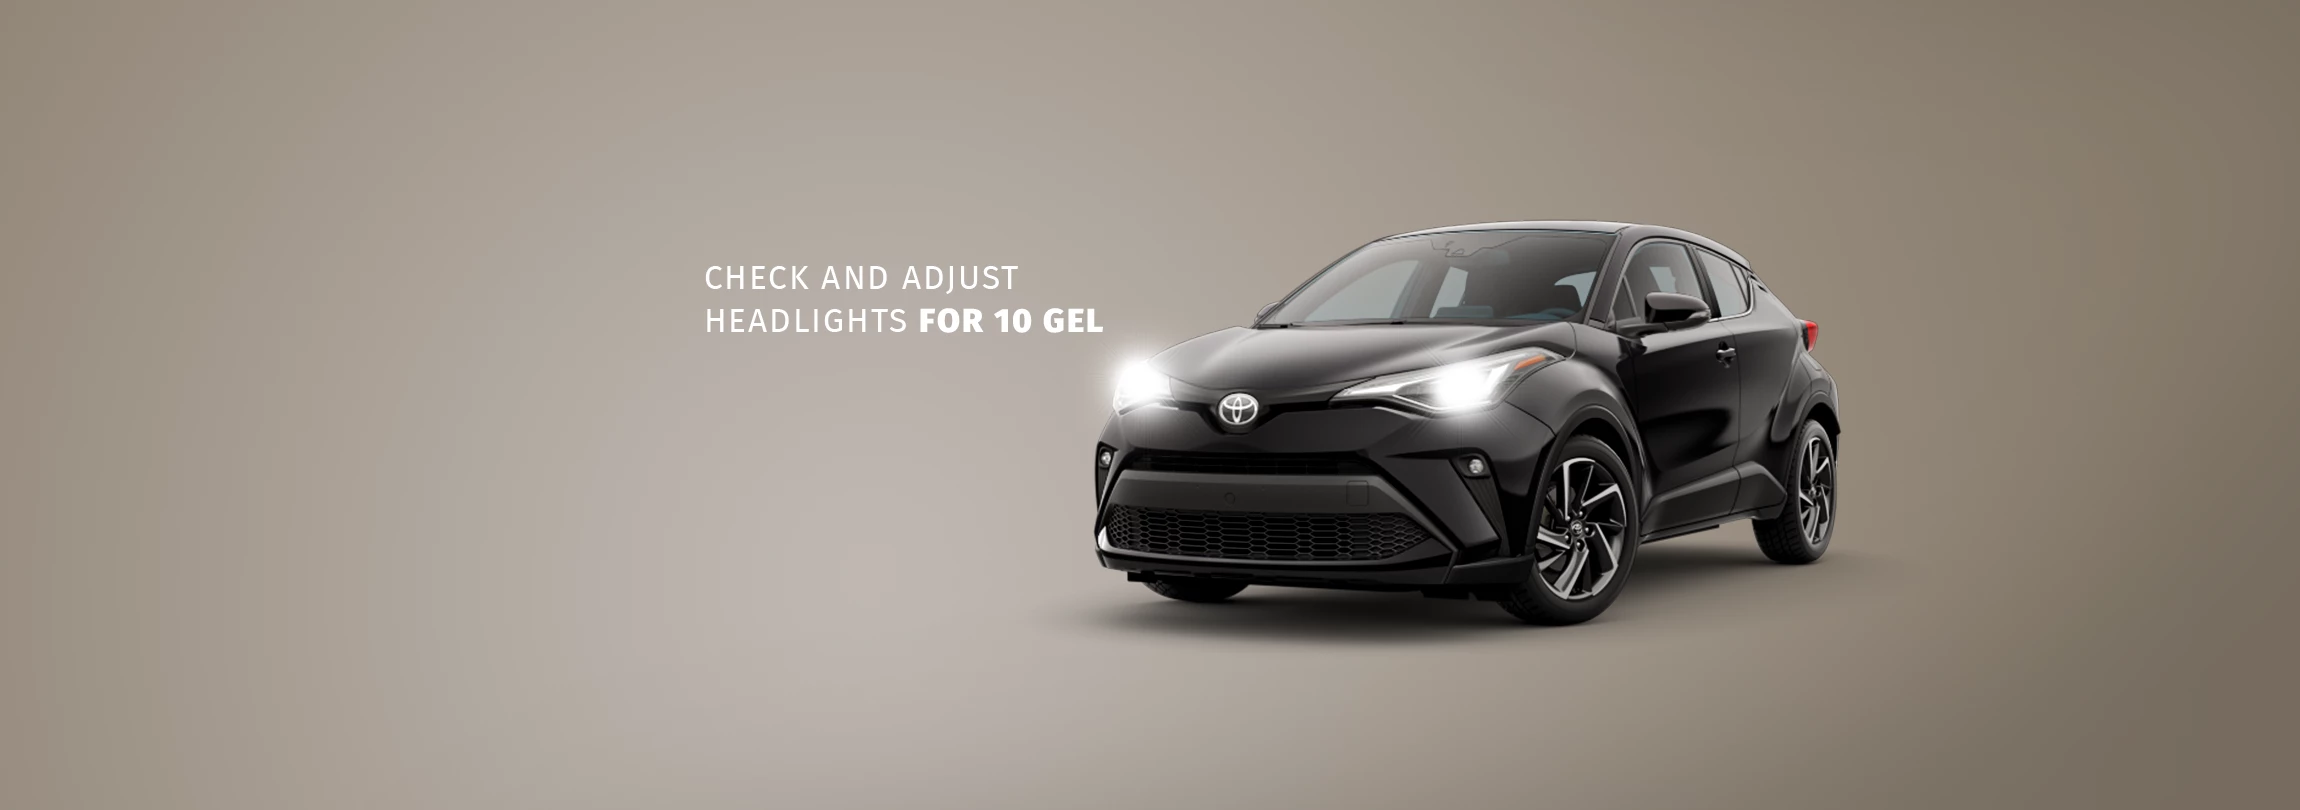 Offer Image Toyota Center Tegeta offers a promotion on headlight inspection/adjustment services